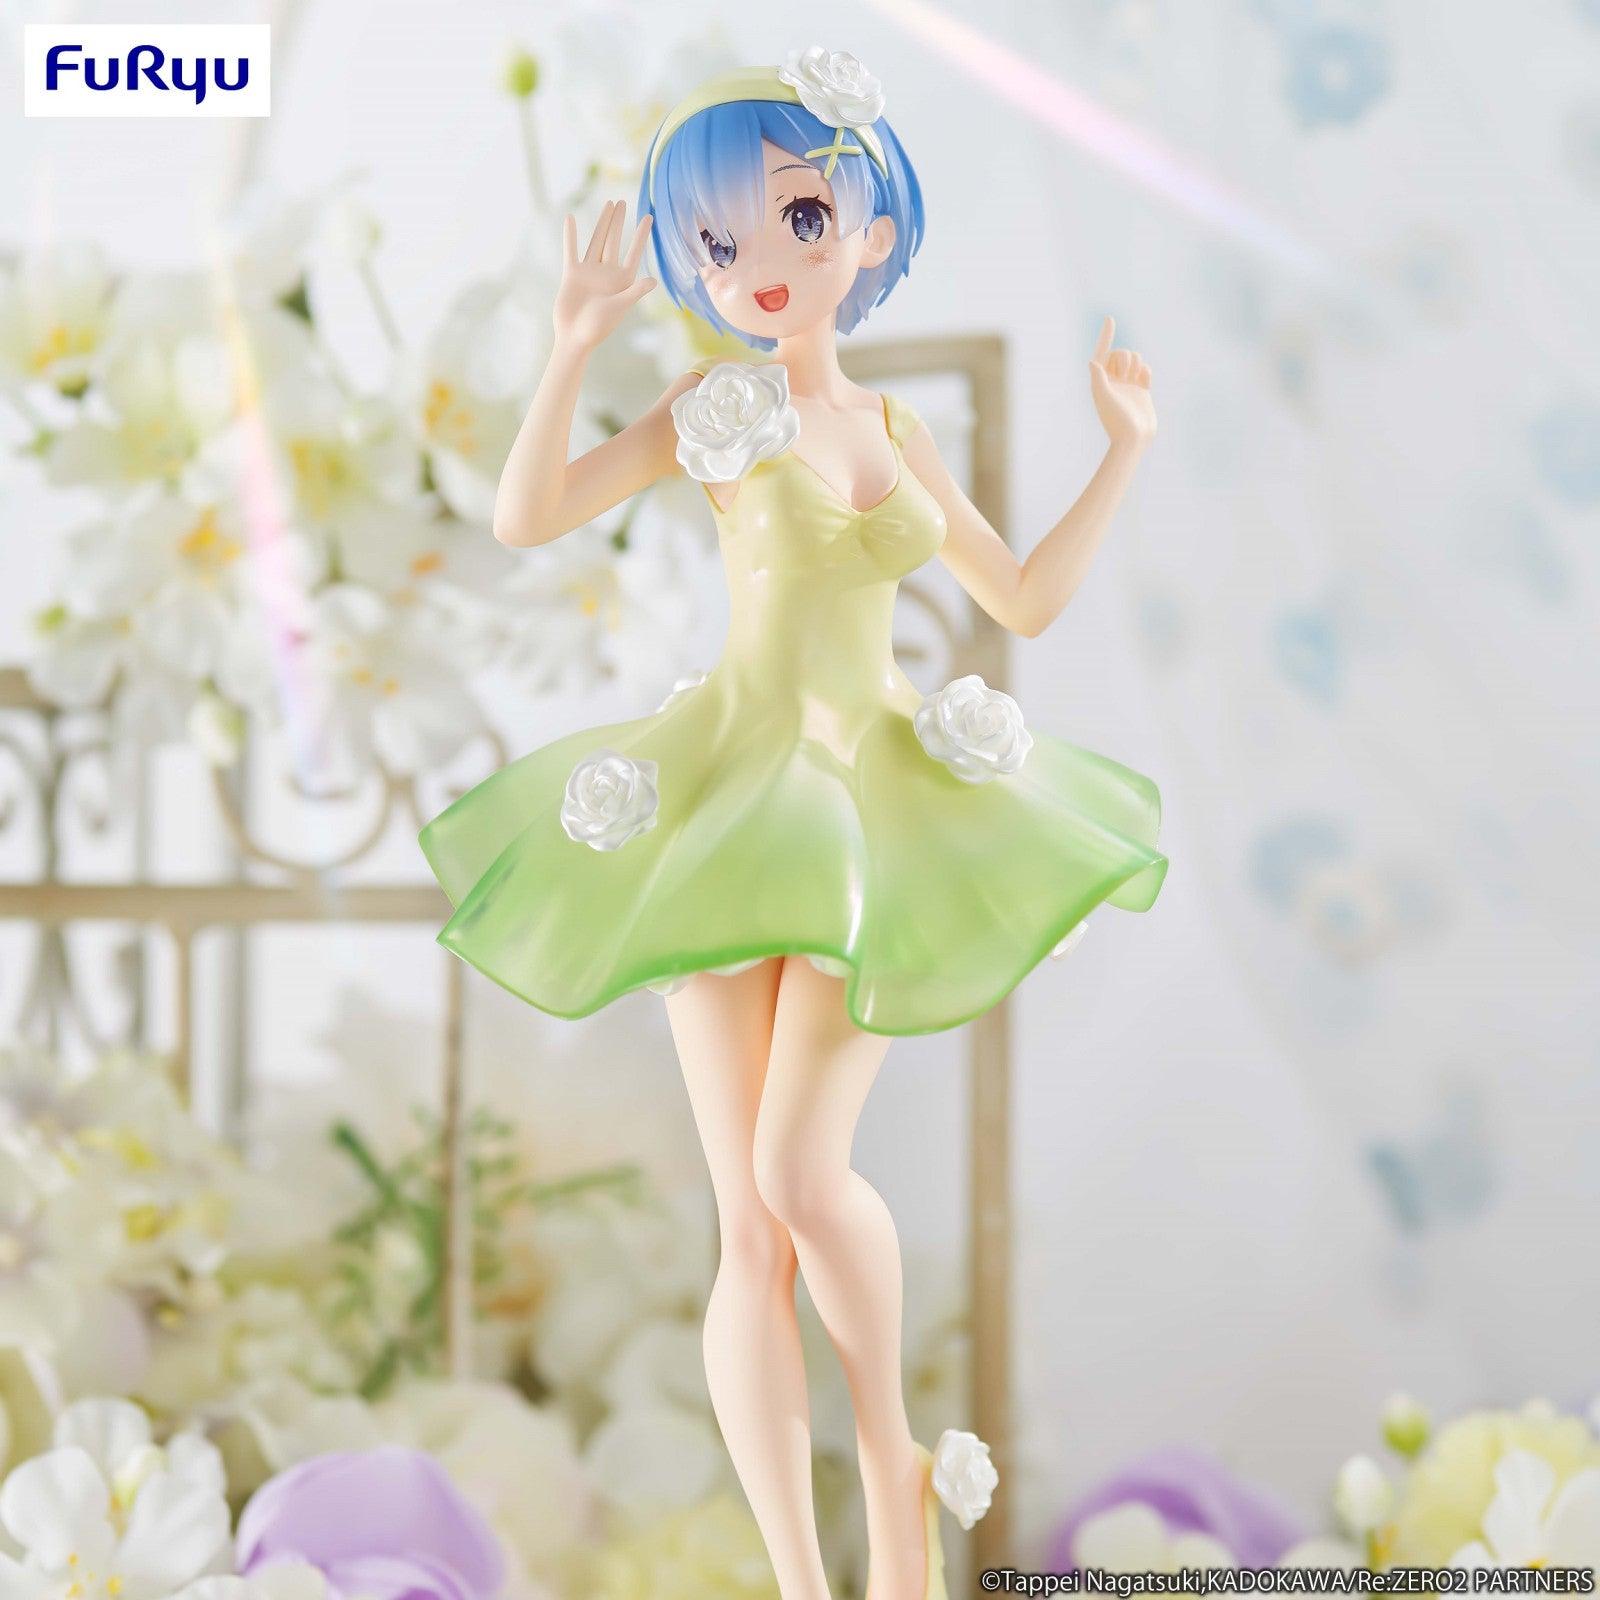 VR-106702 Re:ZERO Starting Life in Another World Trio Try iT Figure Rem Flower Dress - Good Smile Company - Titan Pop Culture